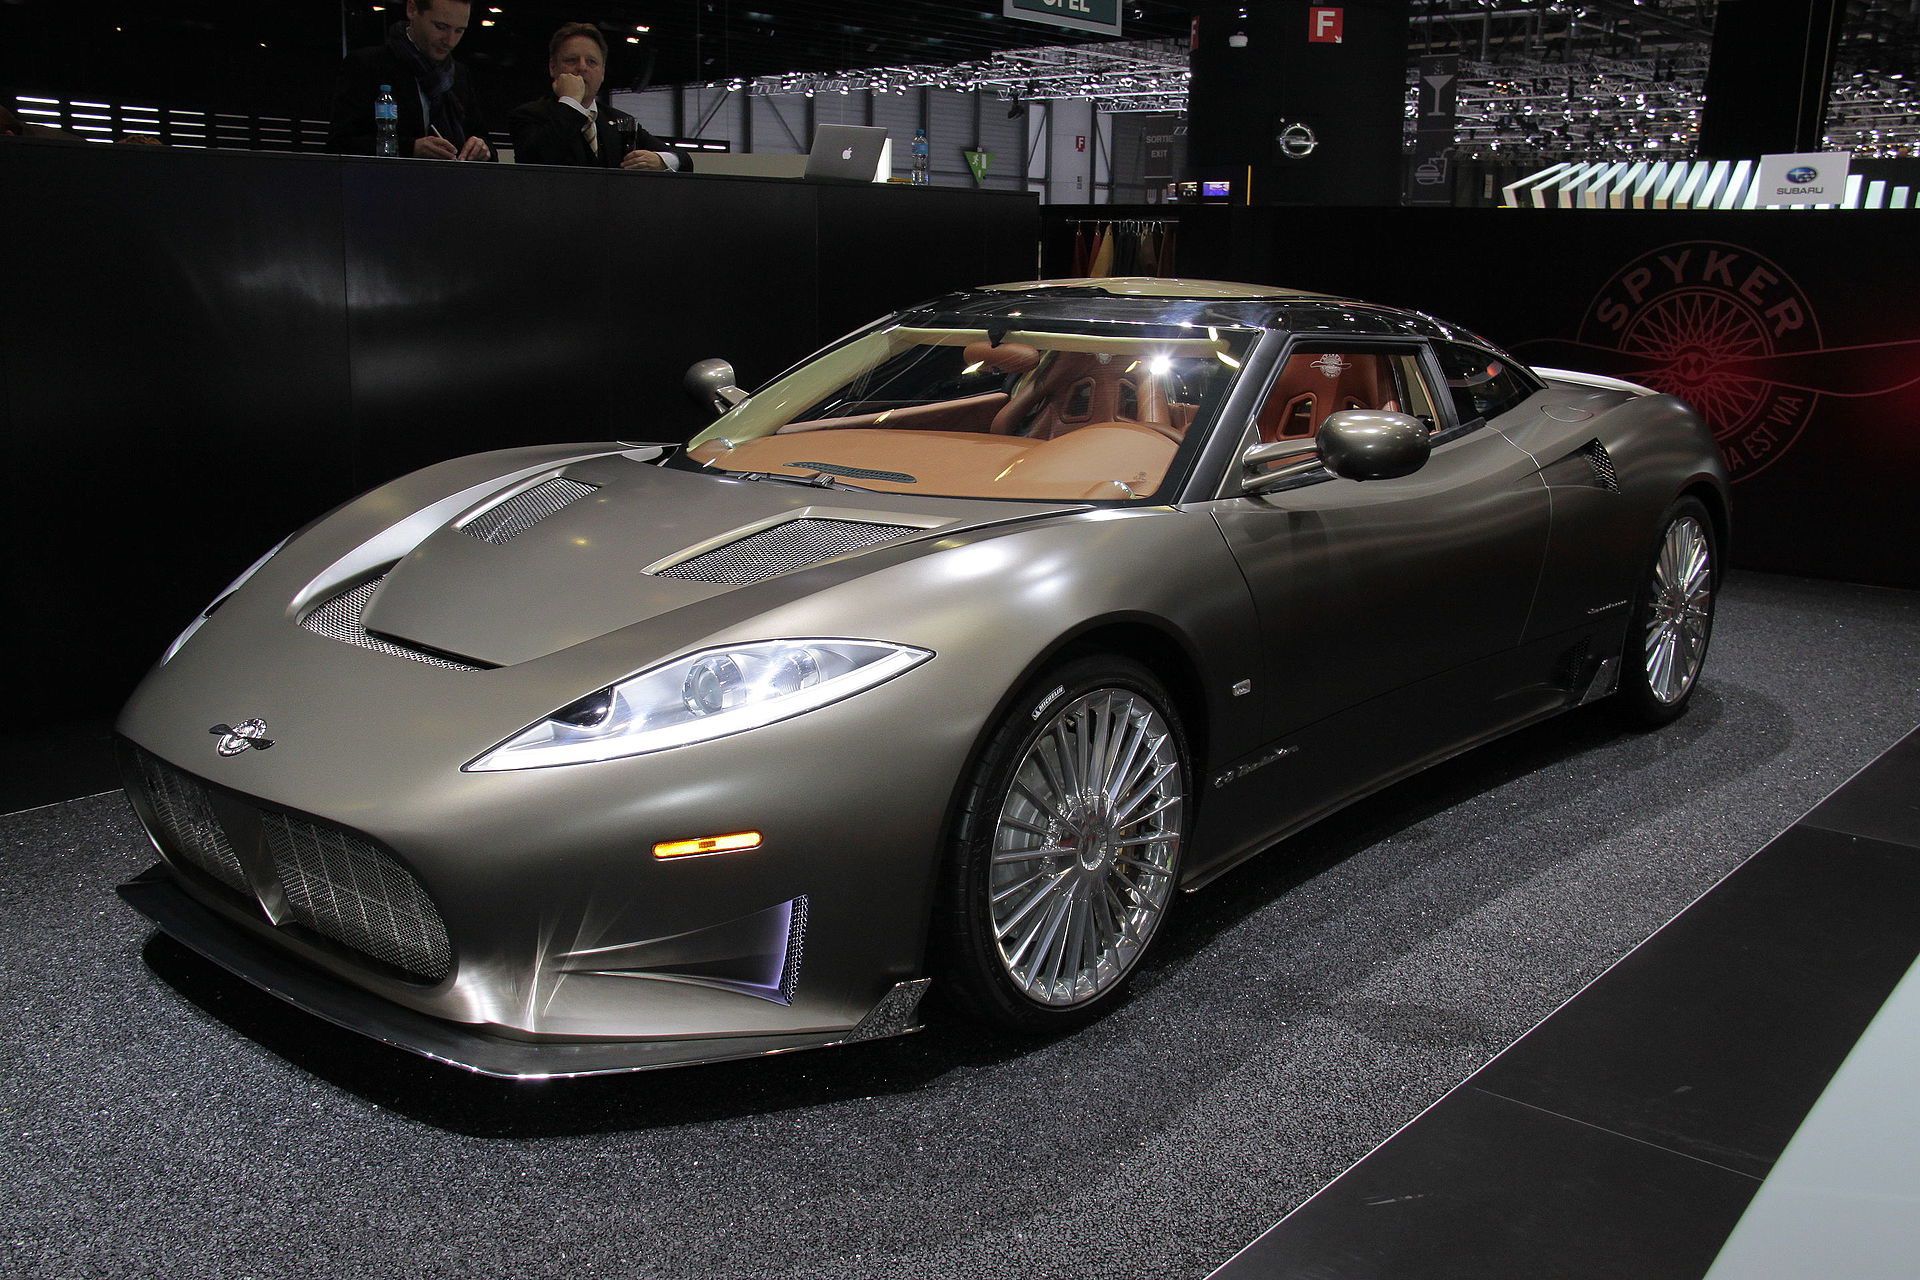 The current Spyker C8 Preliator Coupe.